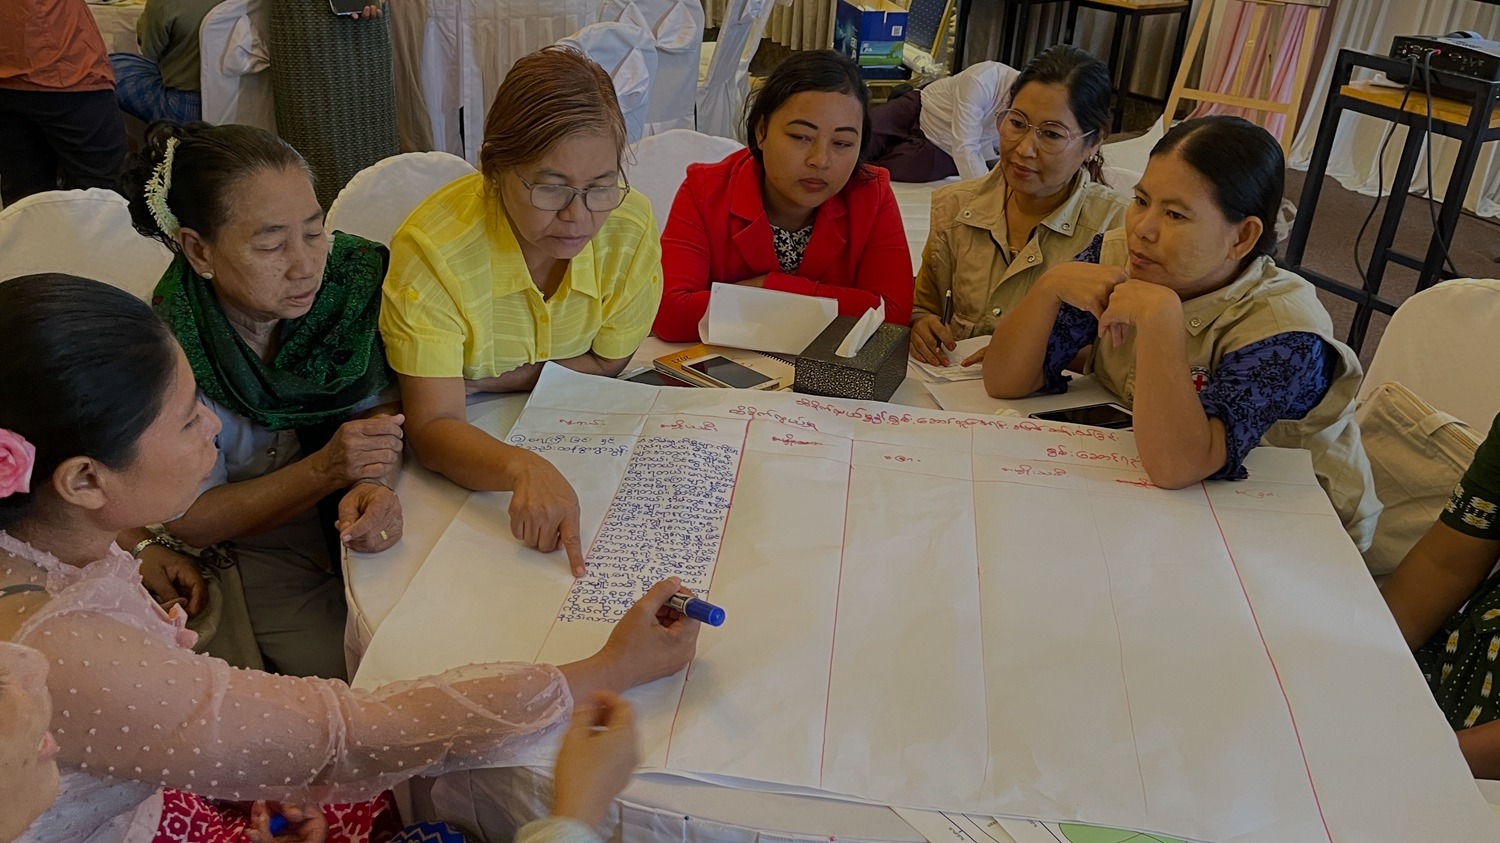 Women lead climate actions for resilient communities in Myanmar